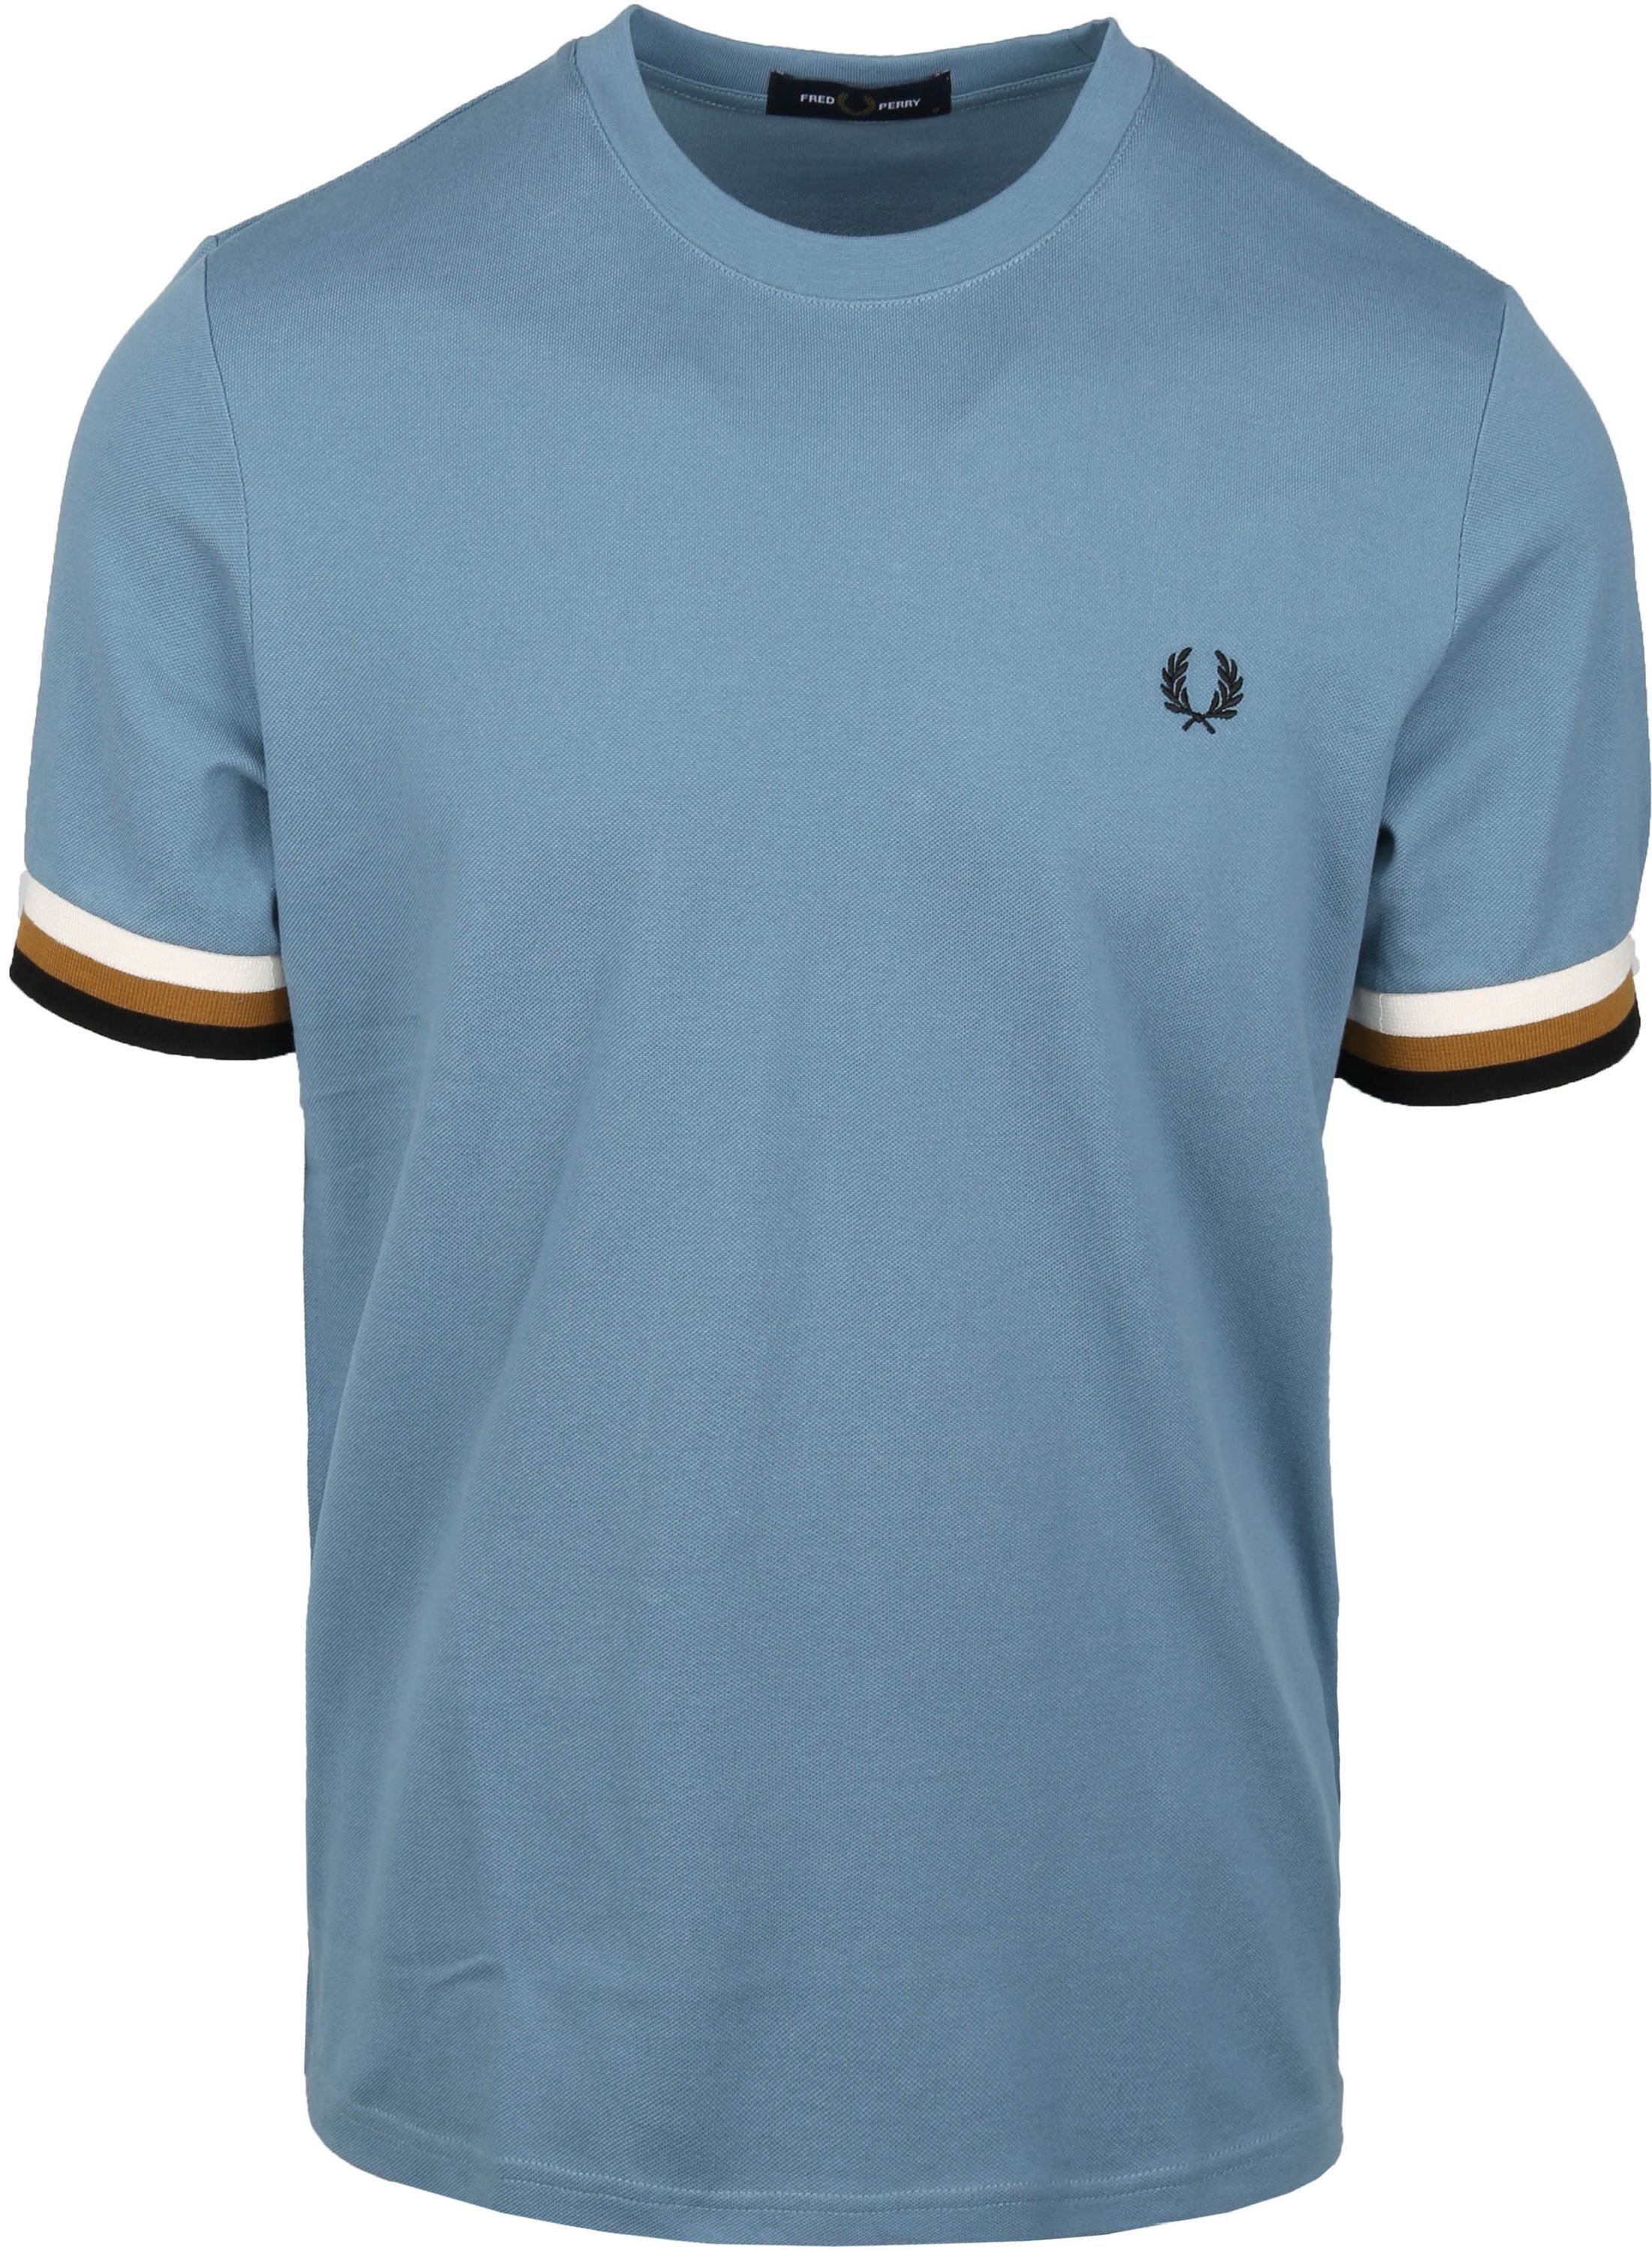 Fred Perry T-Shirt Mid Blue size L